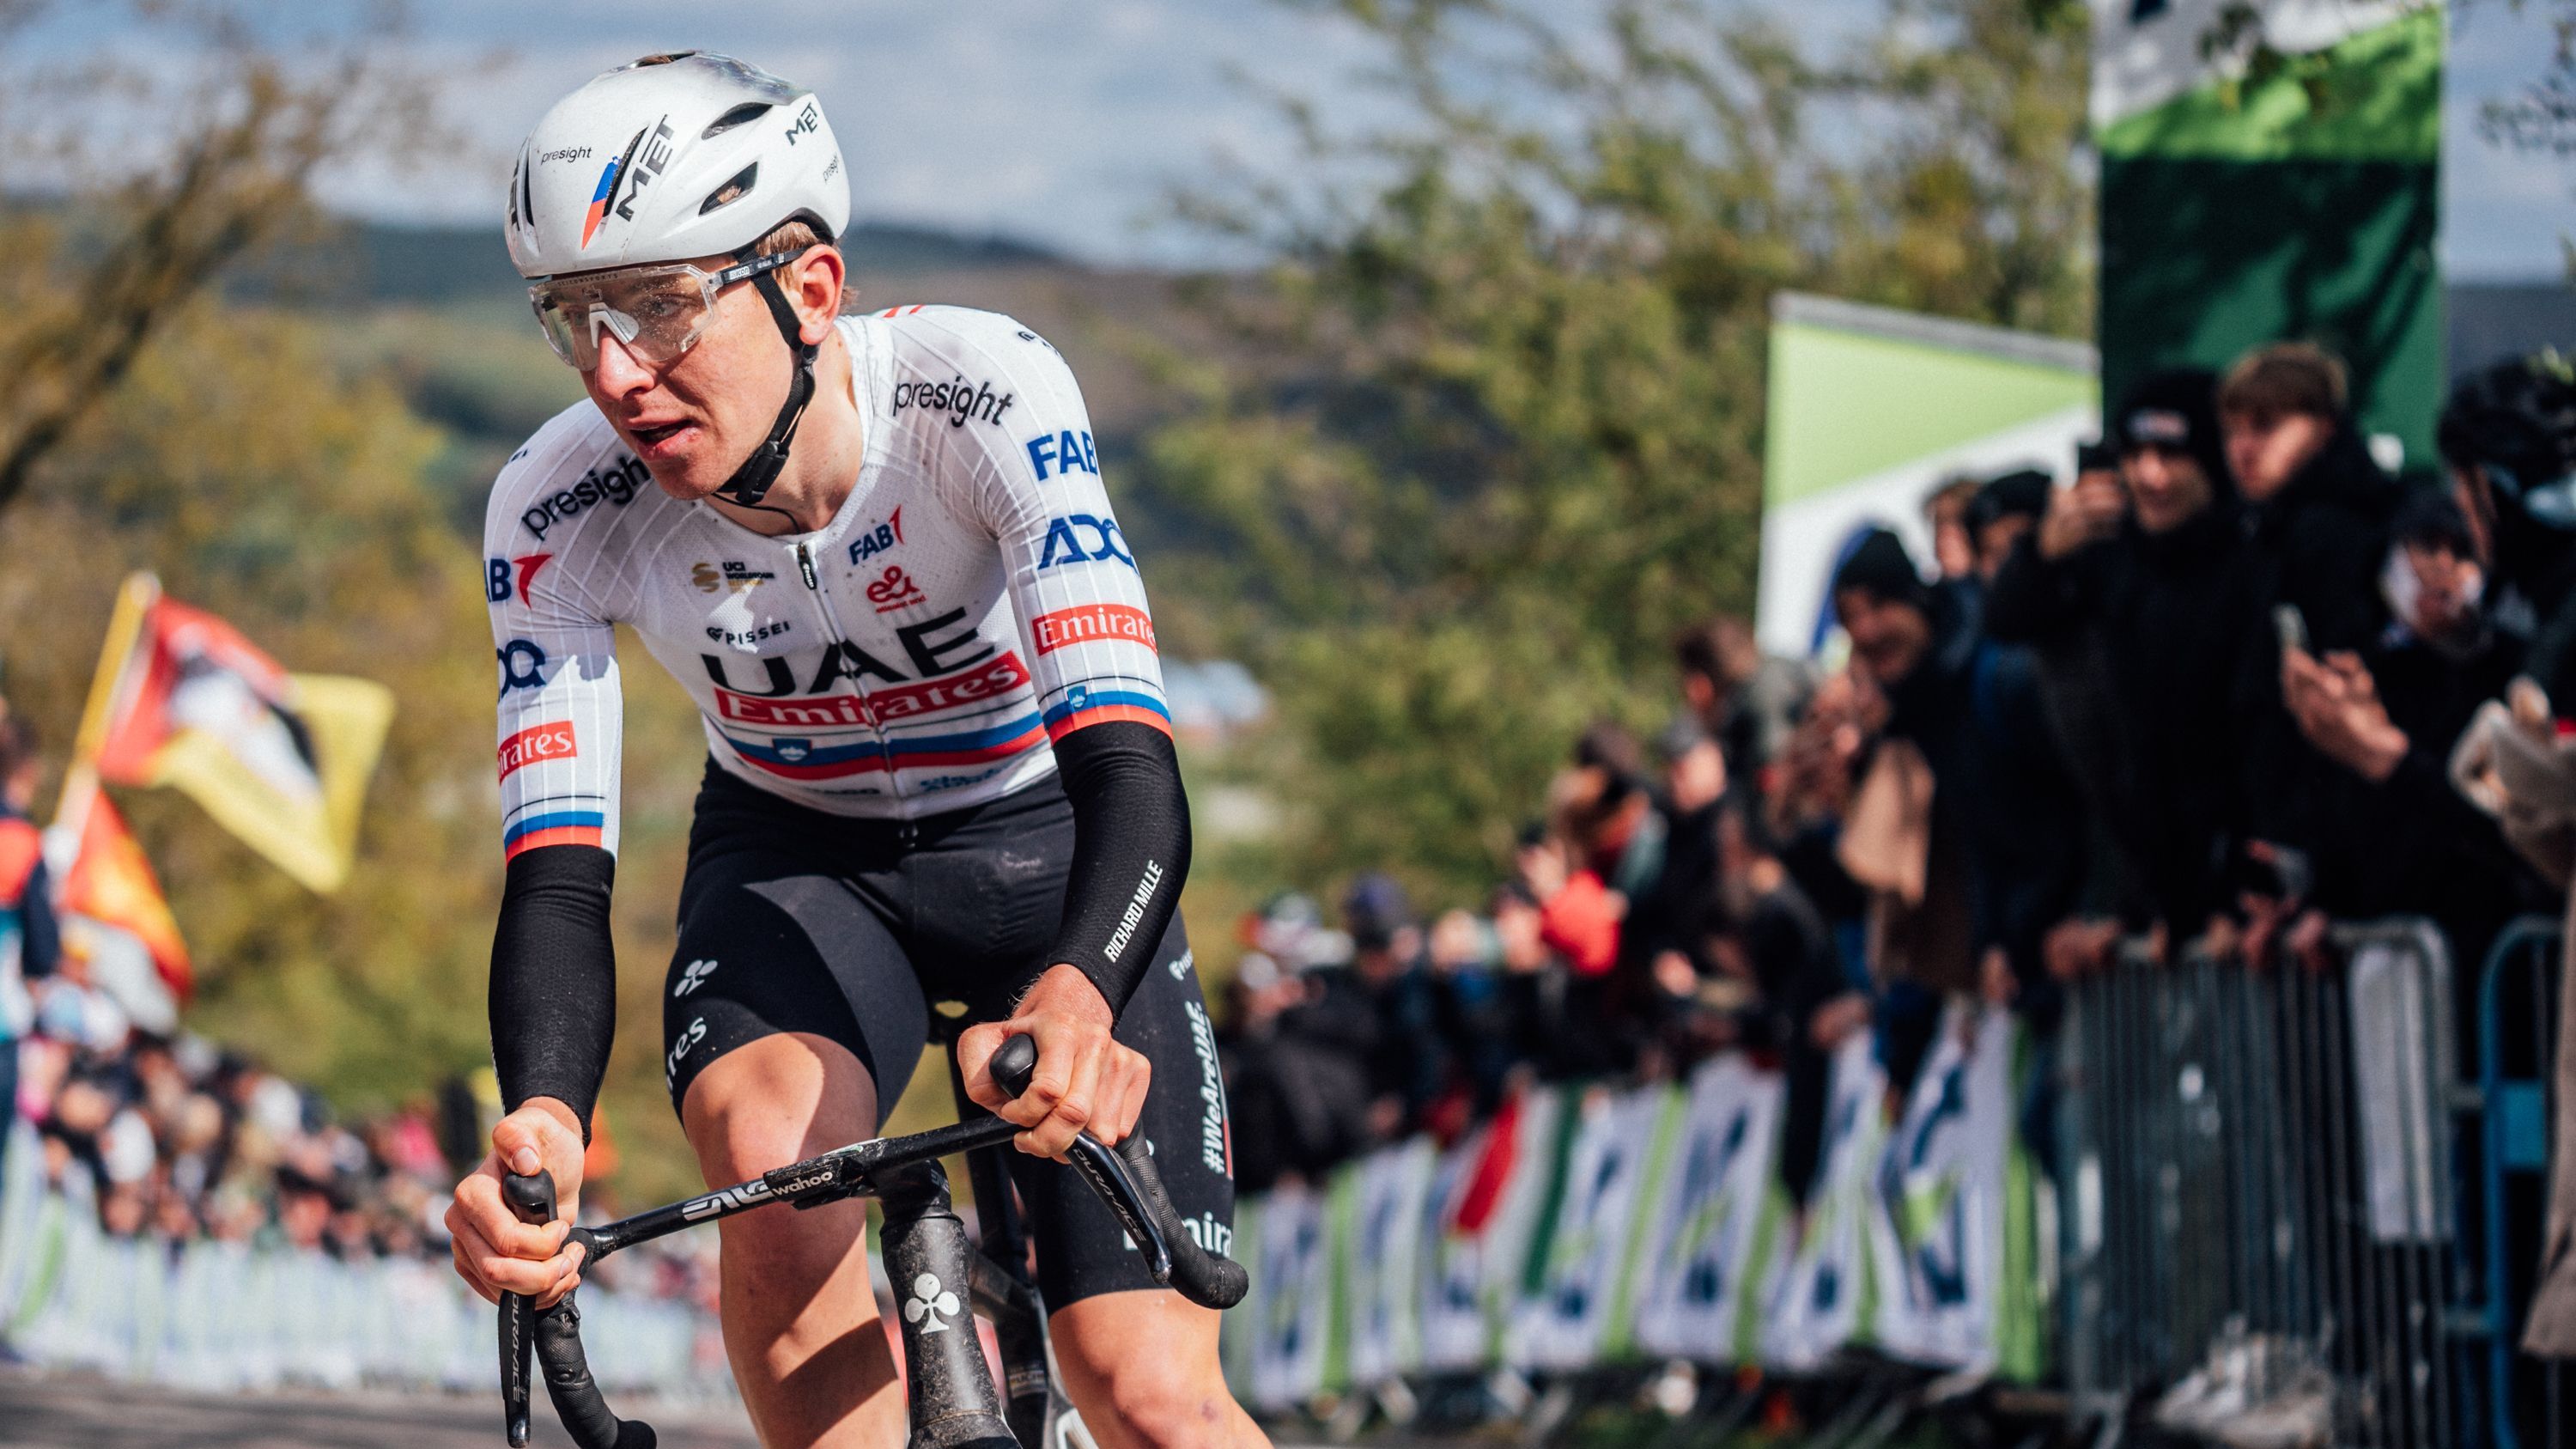 Pogacar beat second-placed Bardet by 1min 39sec at Liège-Bastogne-Liège this week after attacking with 34km to go